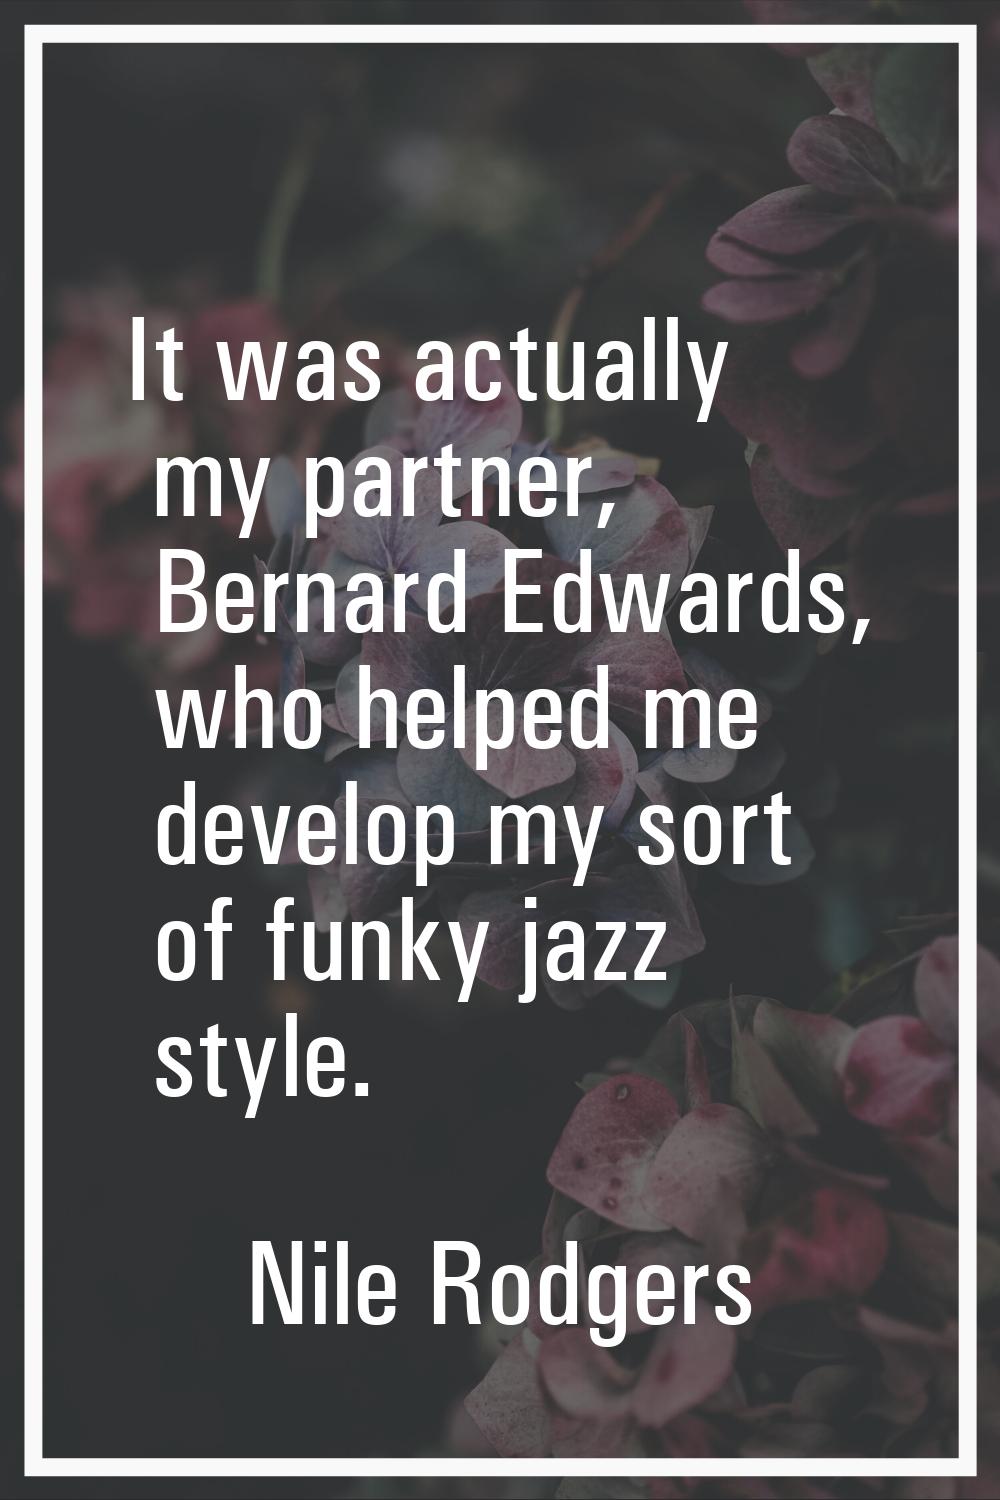 It was actually my partner, Bernard Edwards, who helped me develop my sort of funky jazz style.